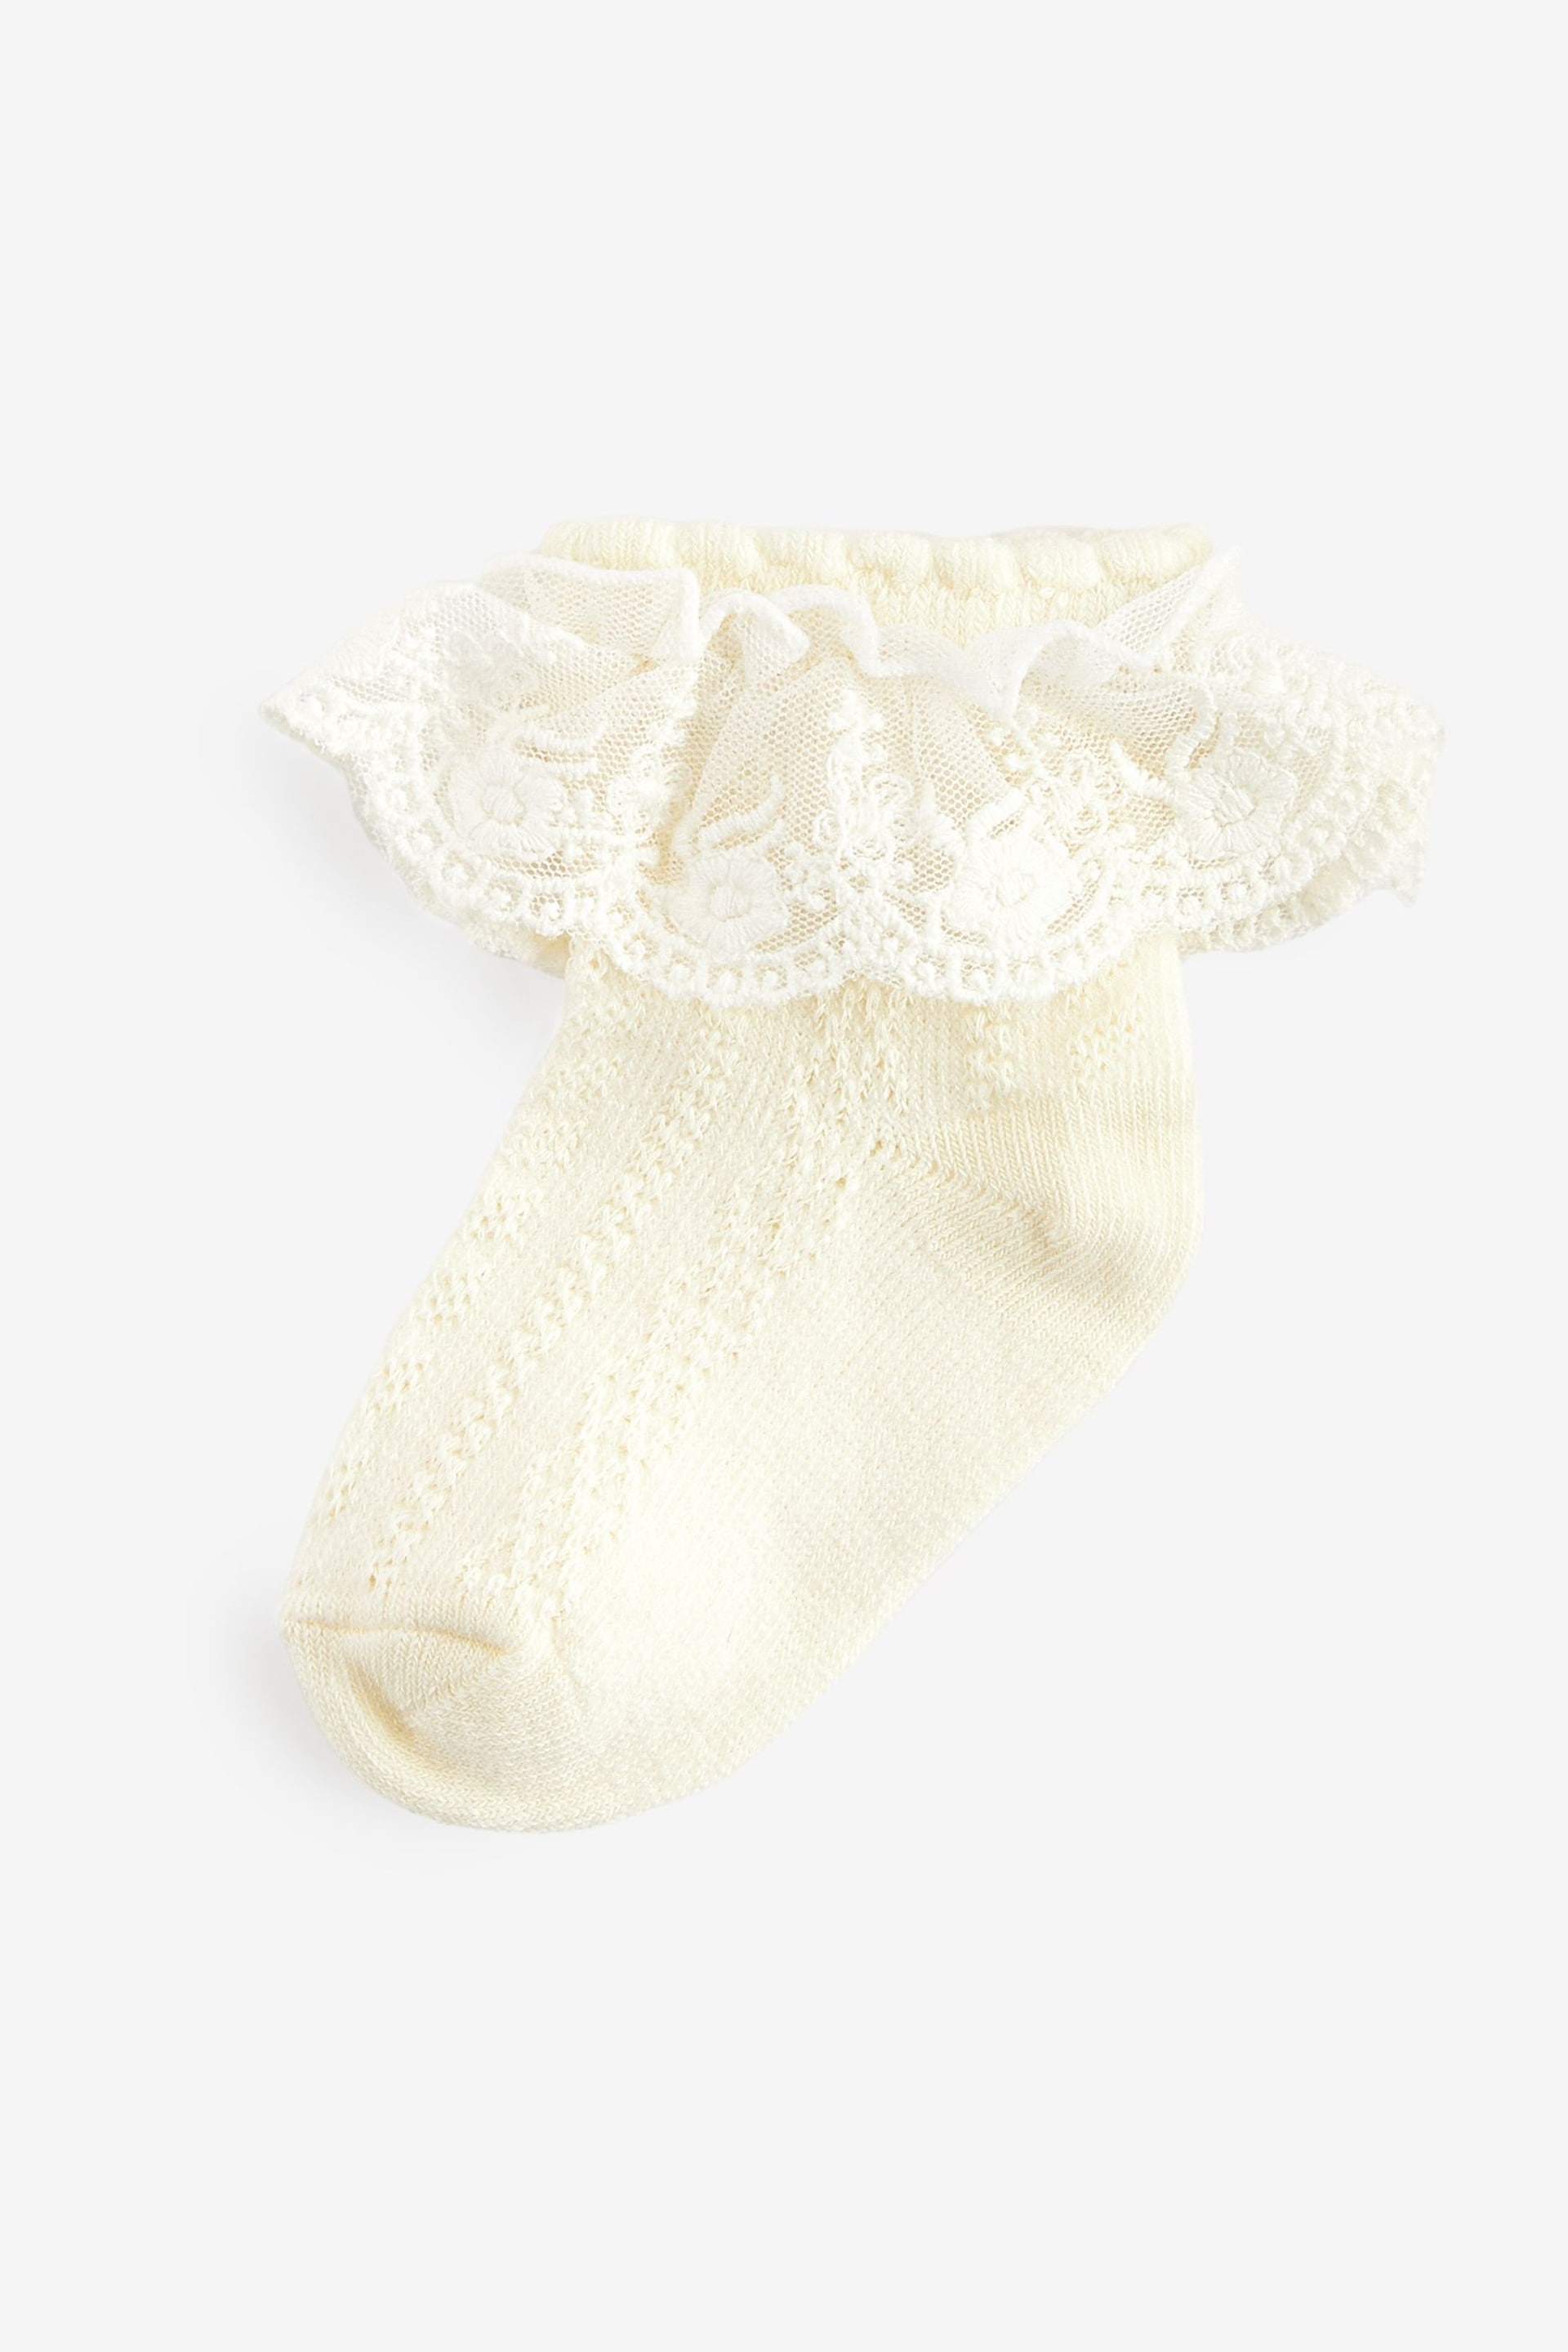 Cream Occasion Lace Socks 1 Pack (0mths-2yrs) - Image 1 of 1